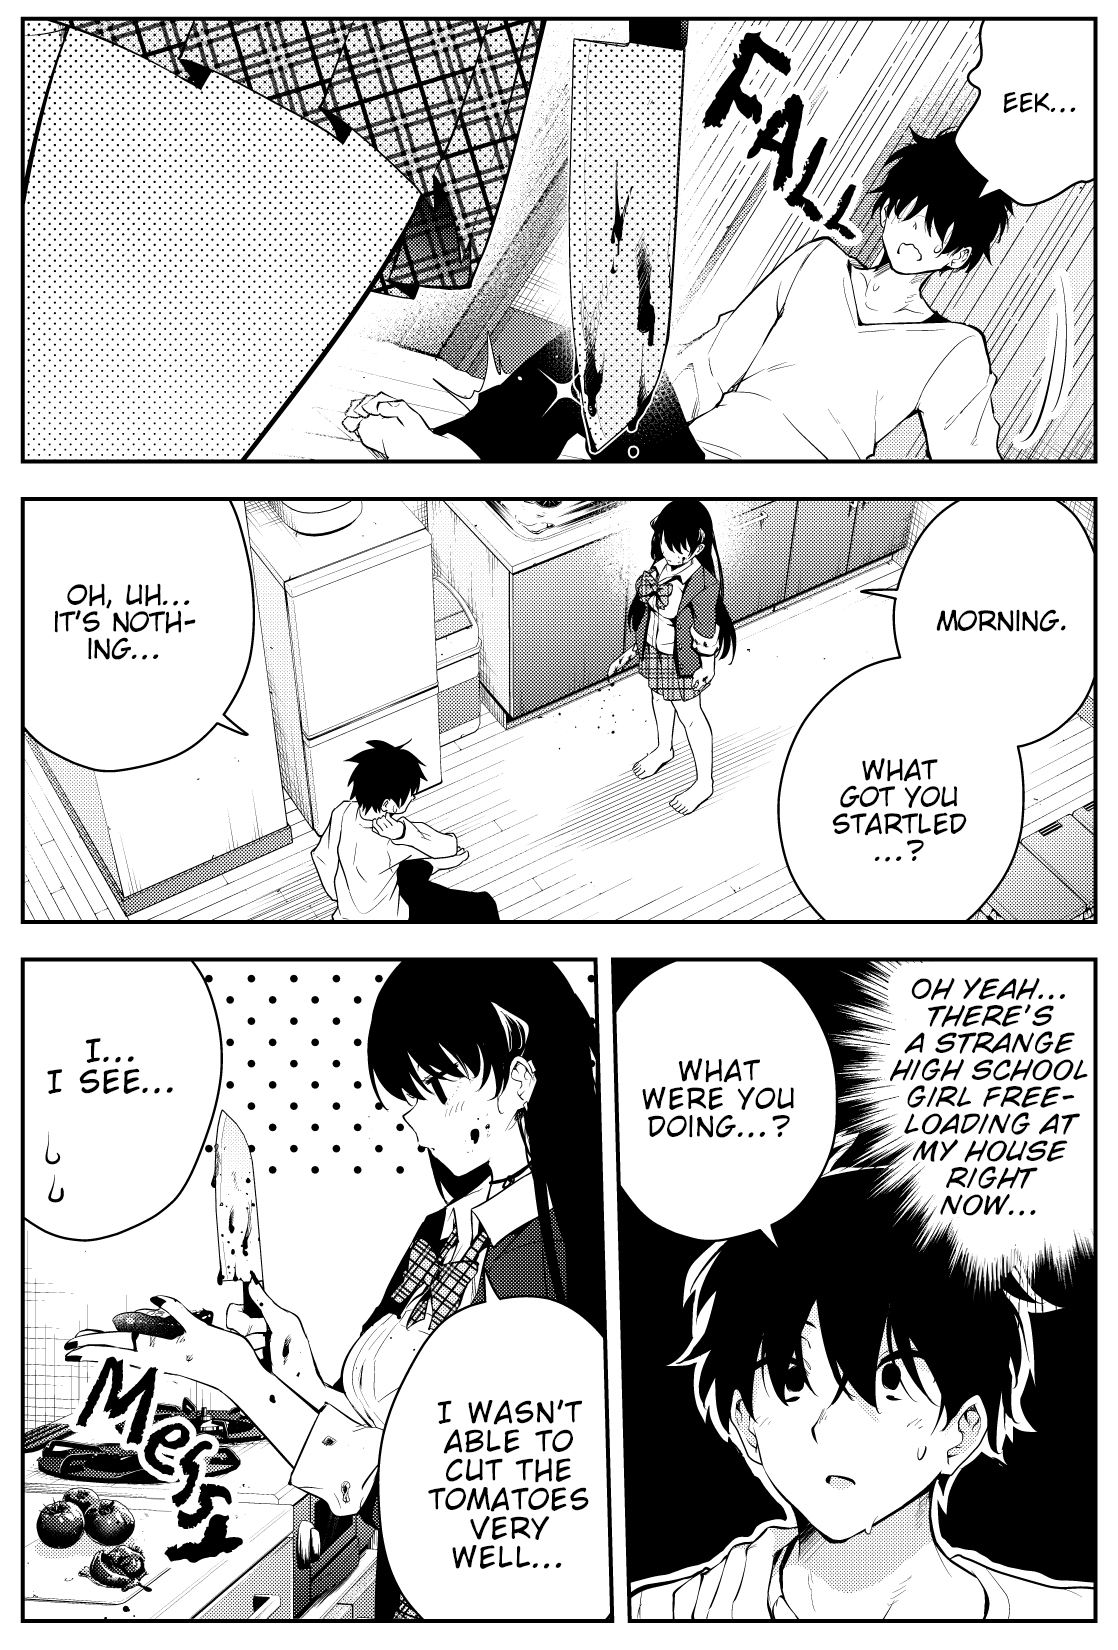 The Story Of A Manga Artist Confined By A Strange High School Girl chapter 32 - page 3